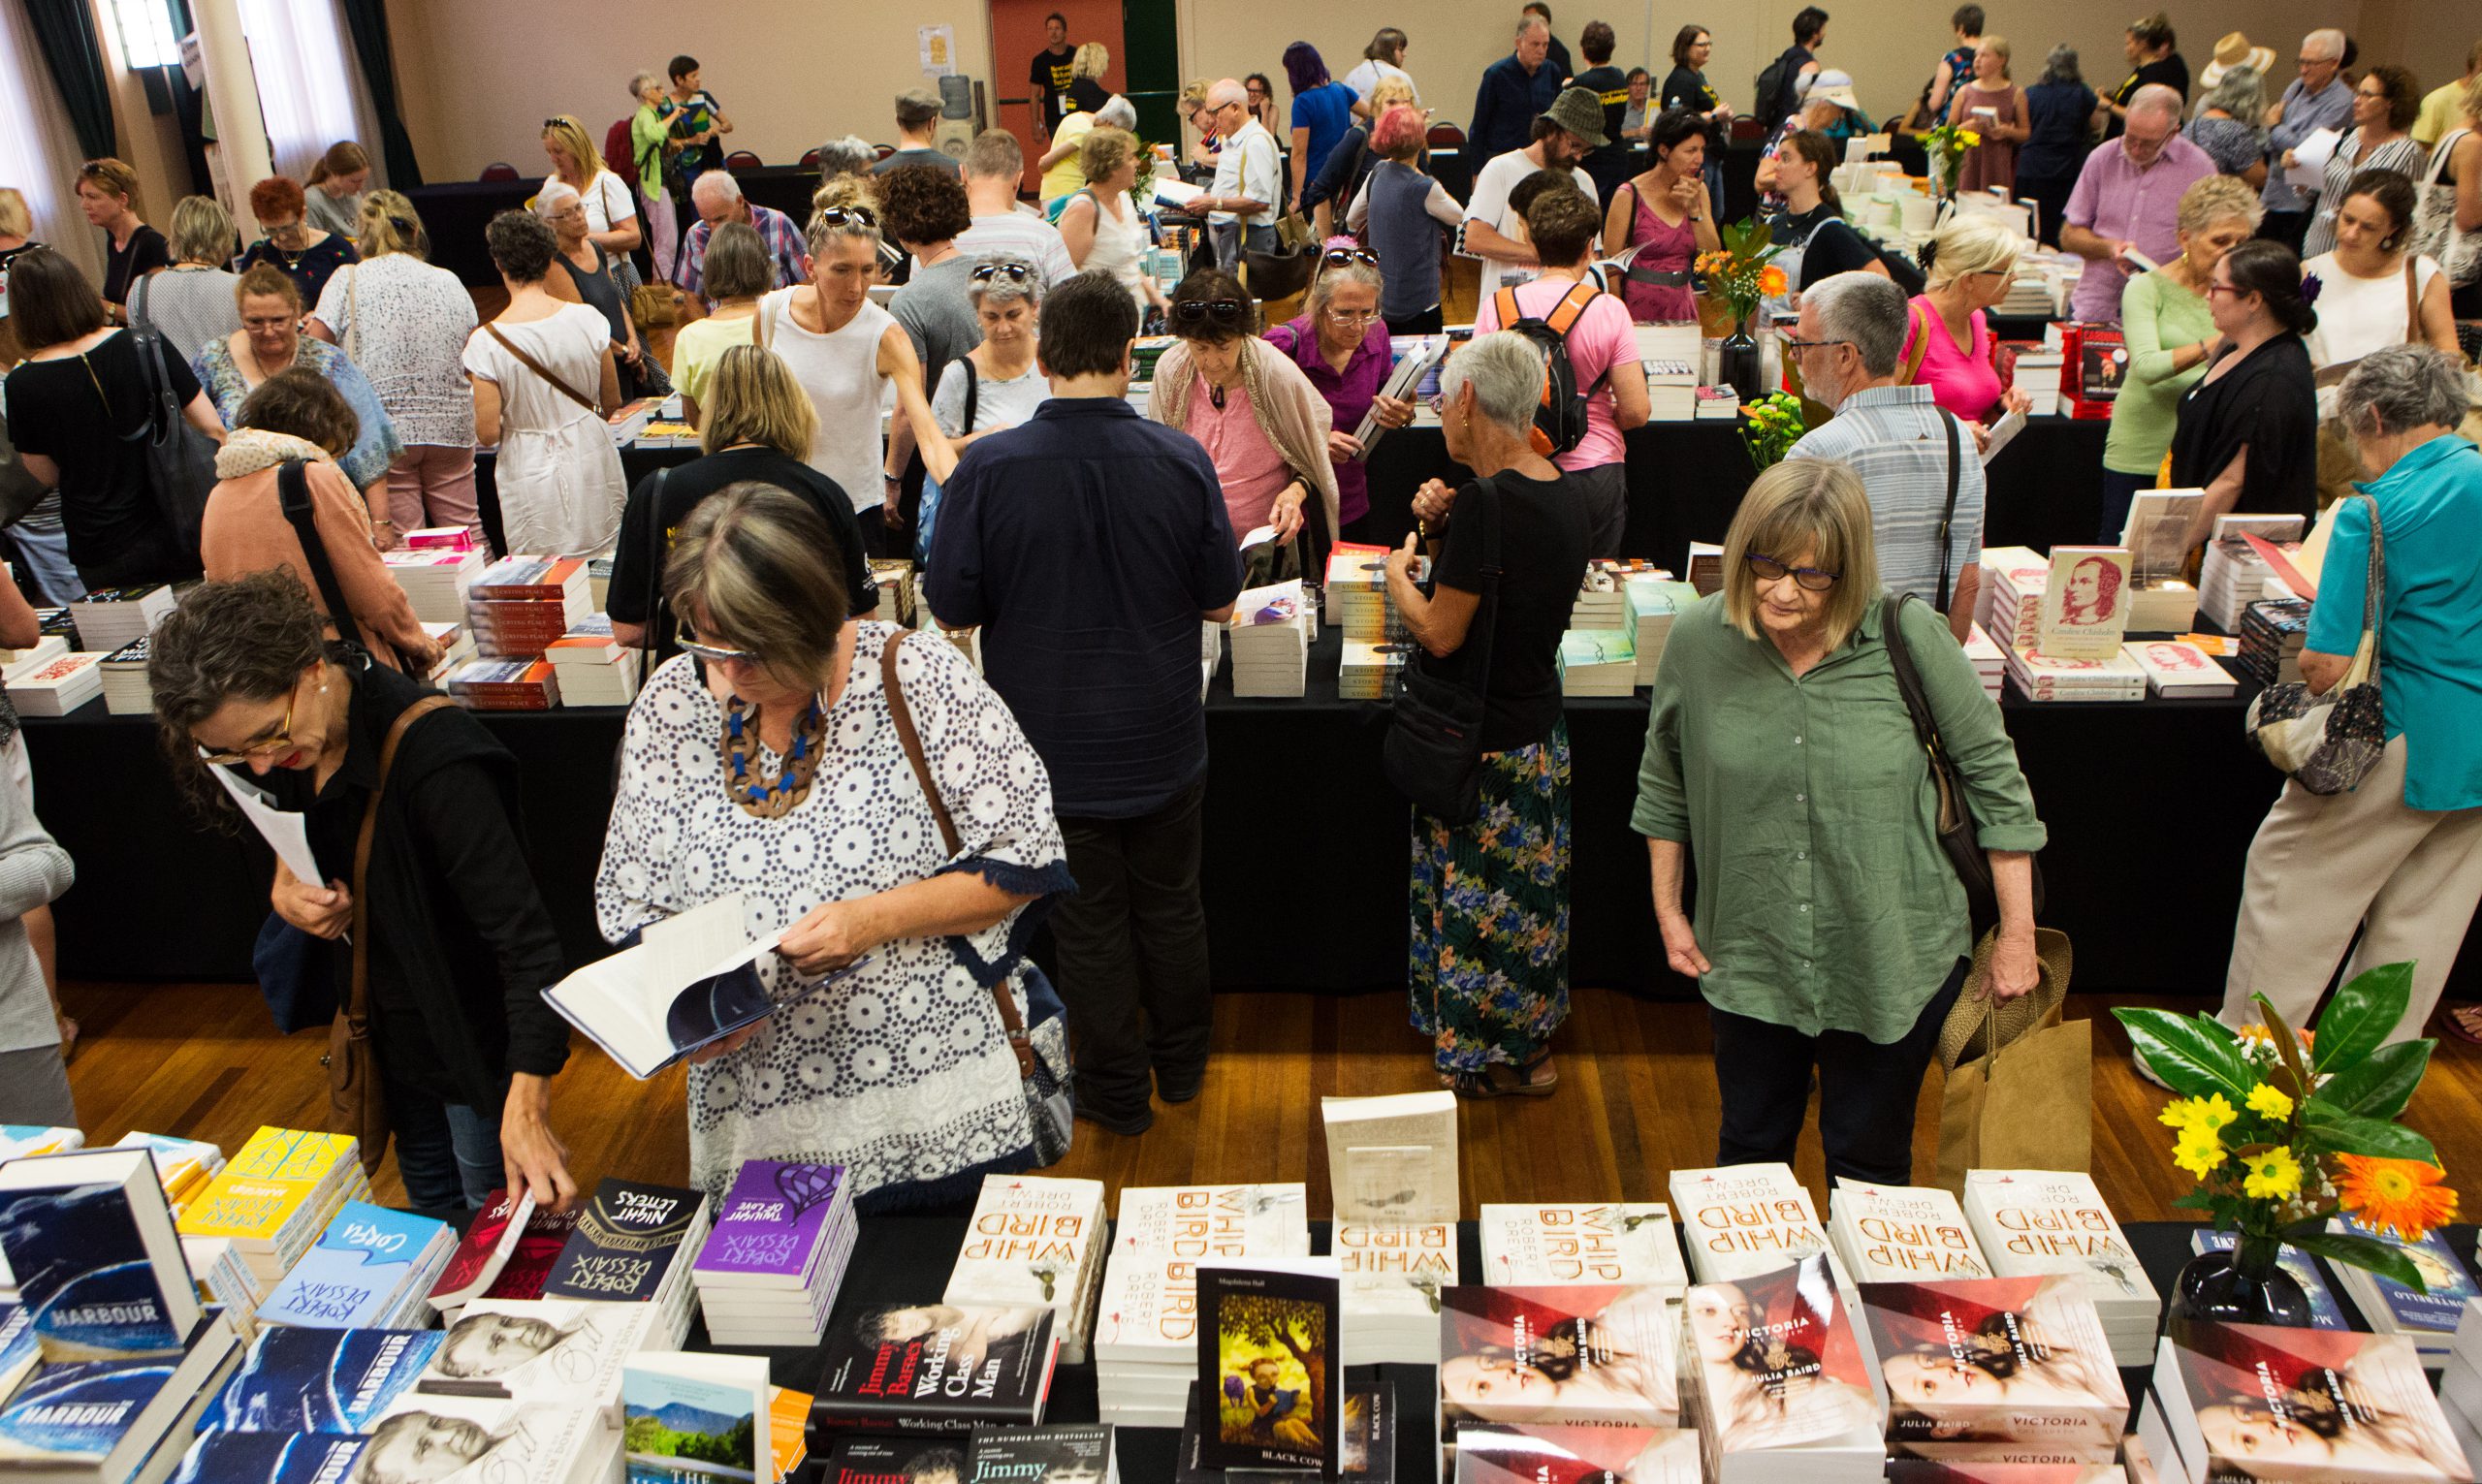 Festival attendees browsing books at the Newcastle Writers Festival